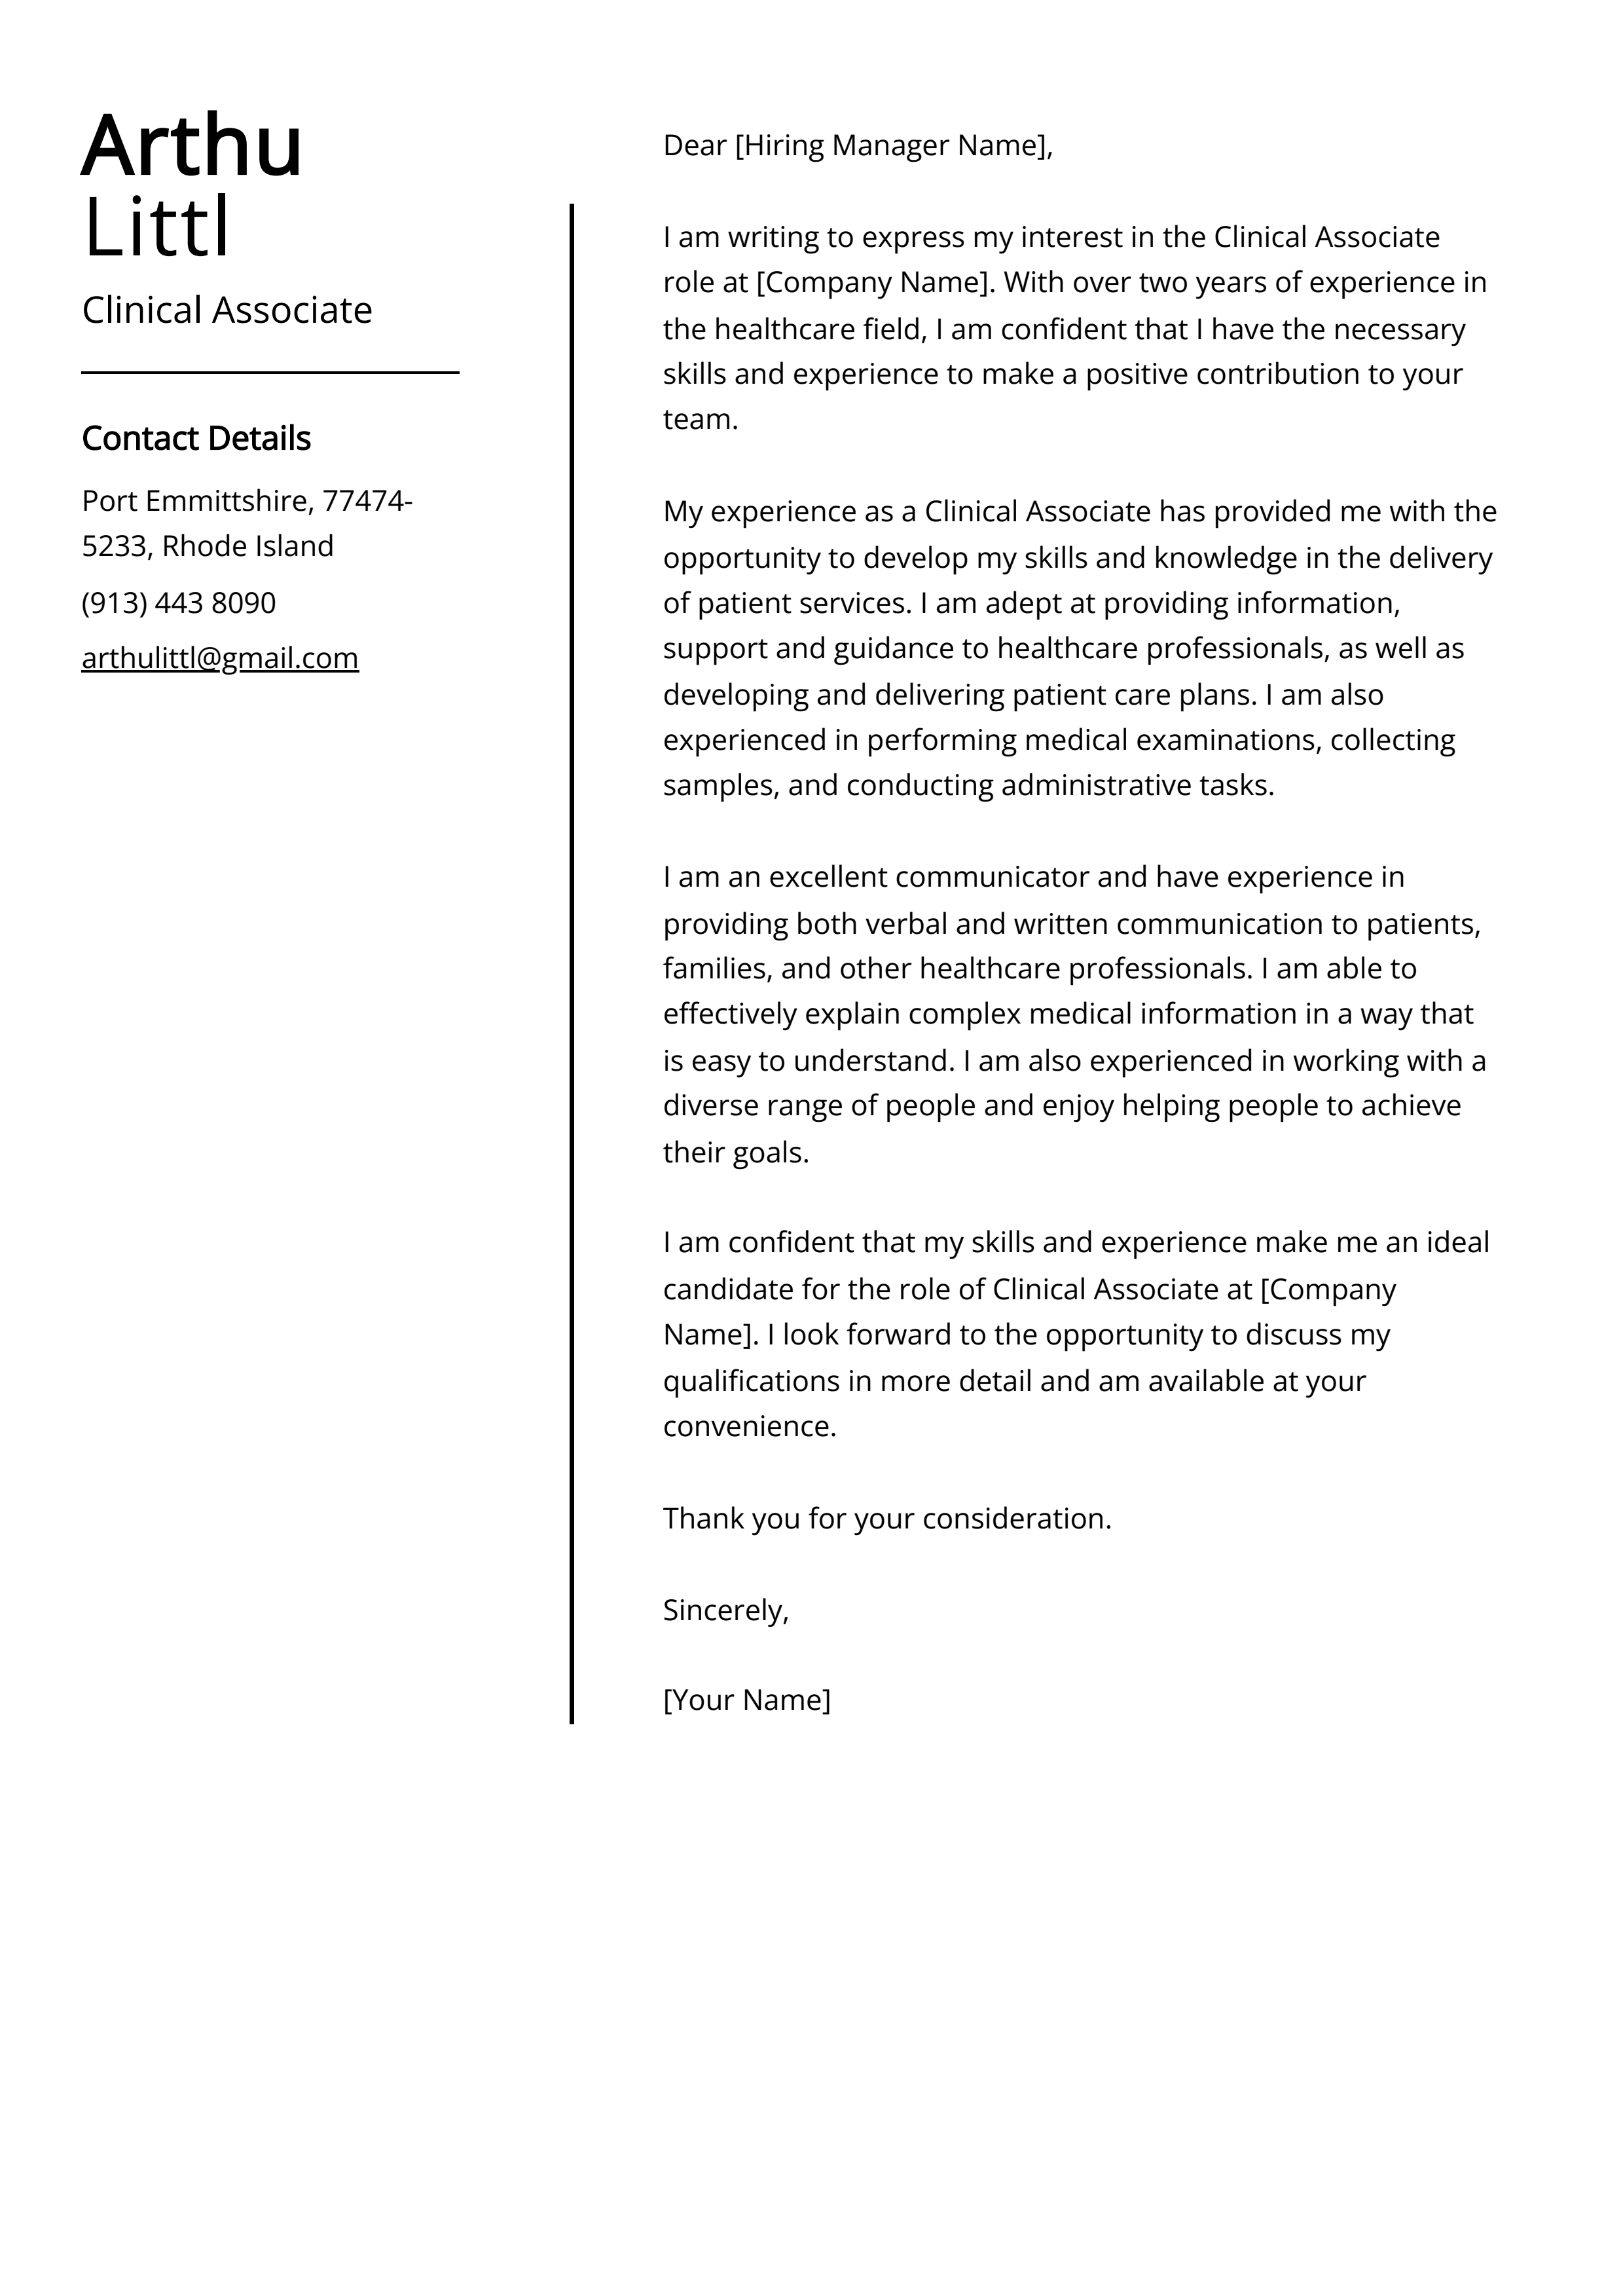 Clinical Associate Cover Letter Example